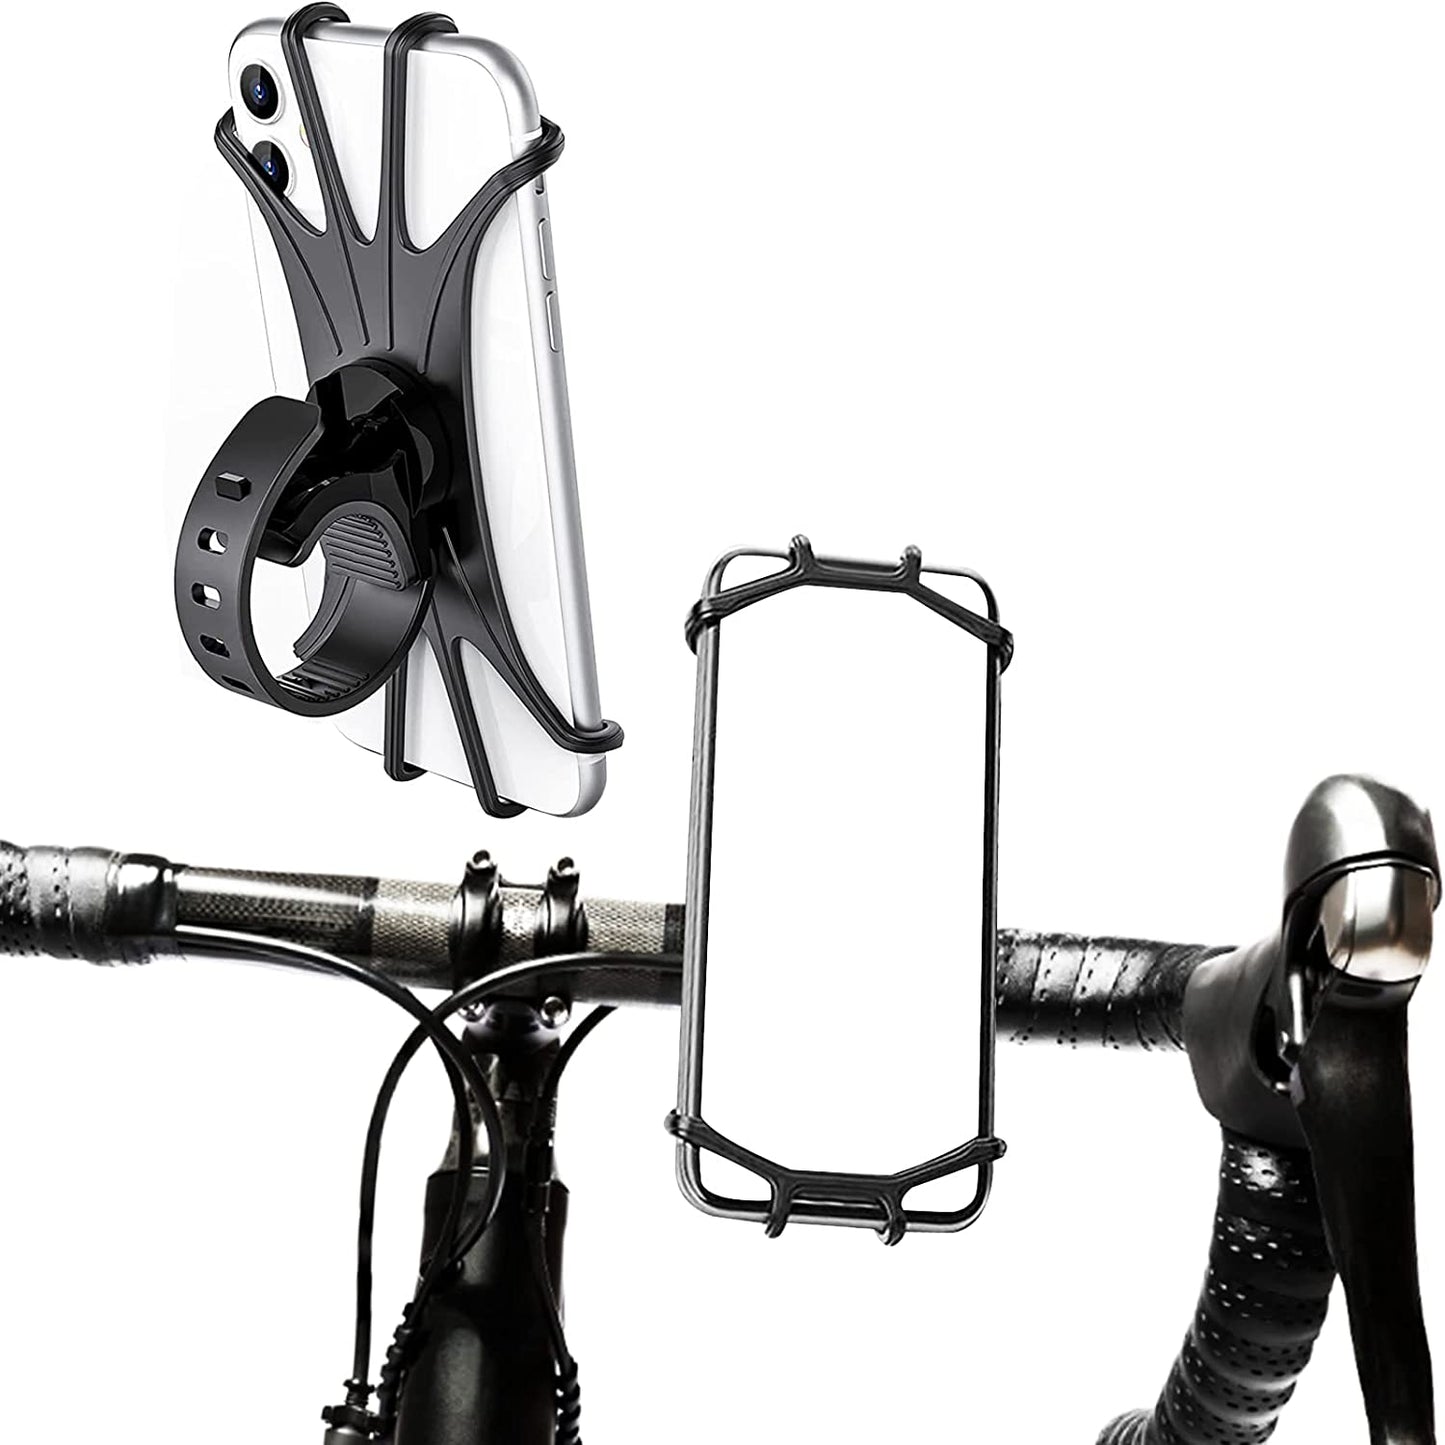 A bicycle with a shock absorption feature and a Tampa Bay eBikes silicone Cell Phone Holder attached to it.